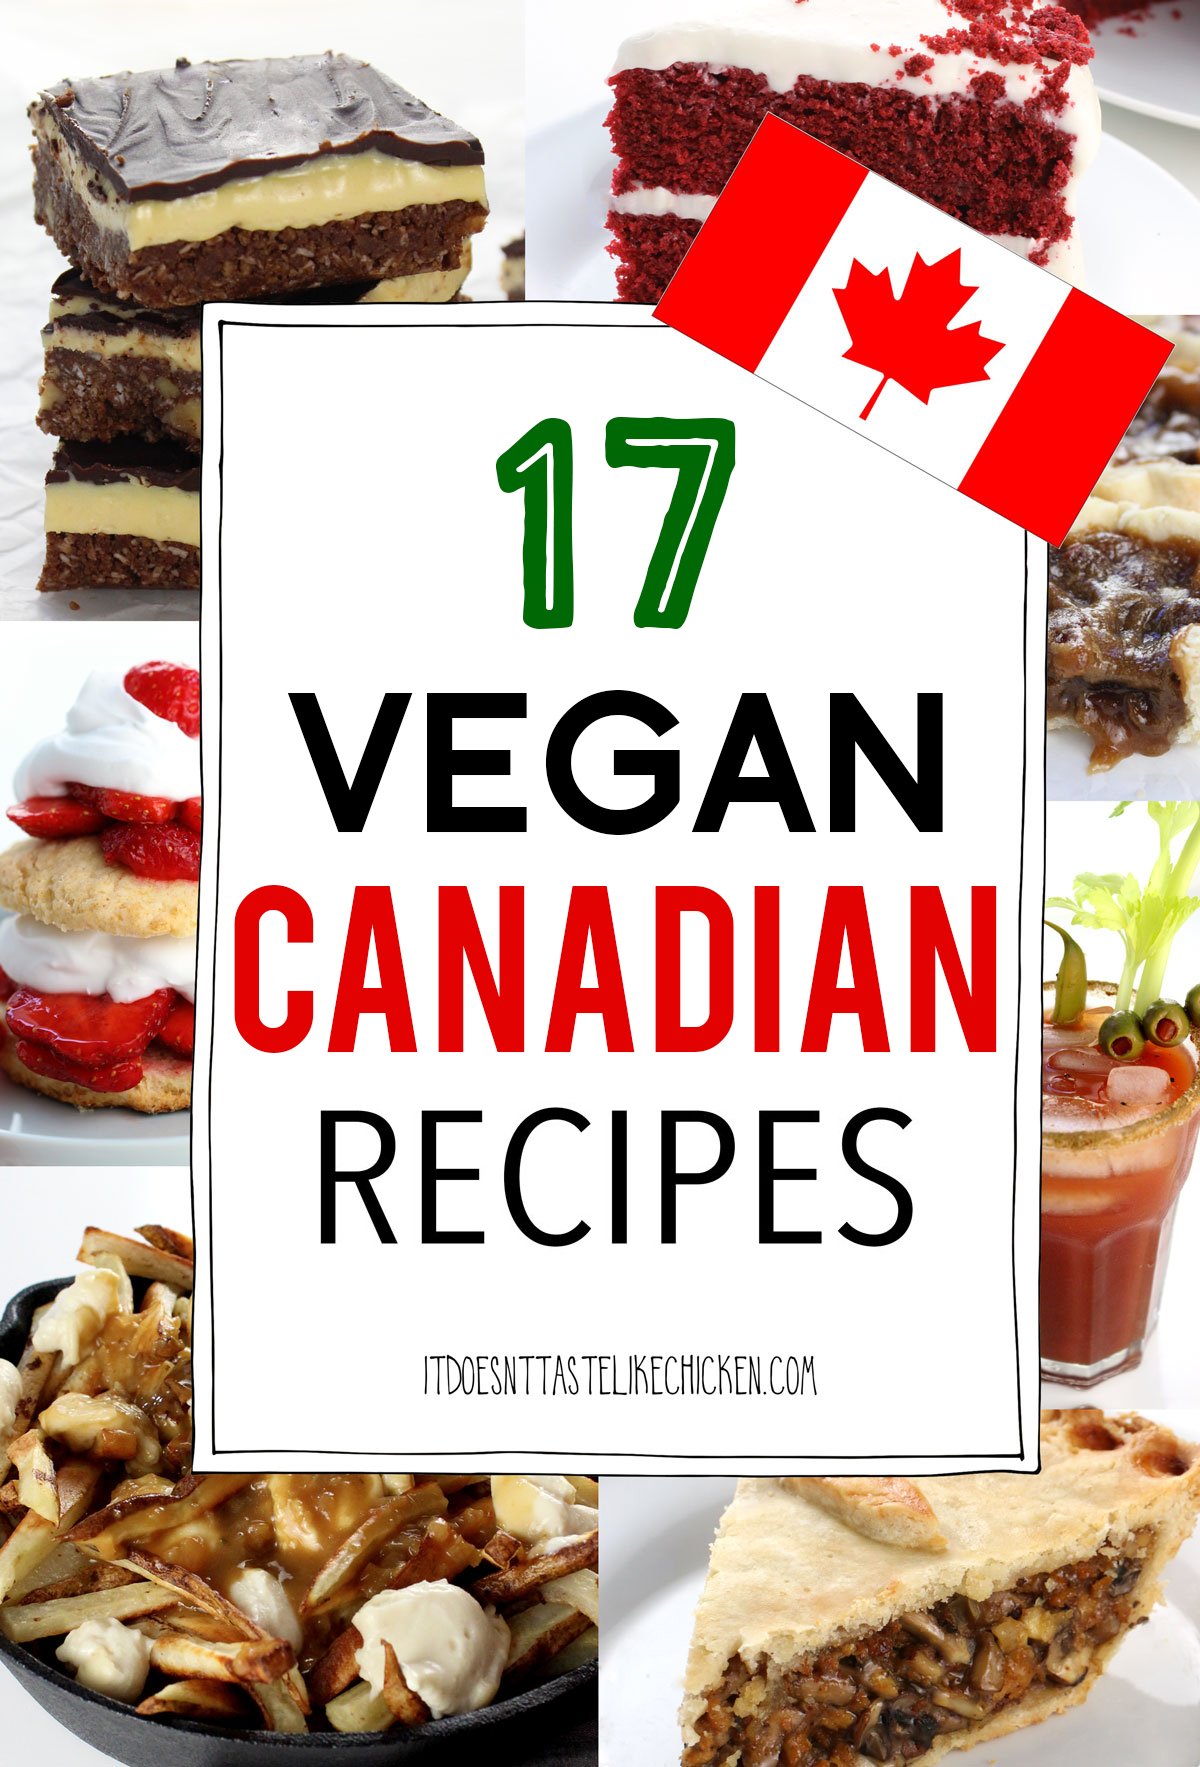 17 Vegan Canadian Recipes! Some of these recipes are classic Canadian favorites that have been veganized! 